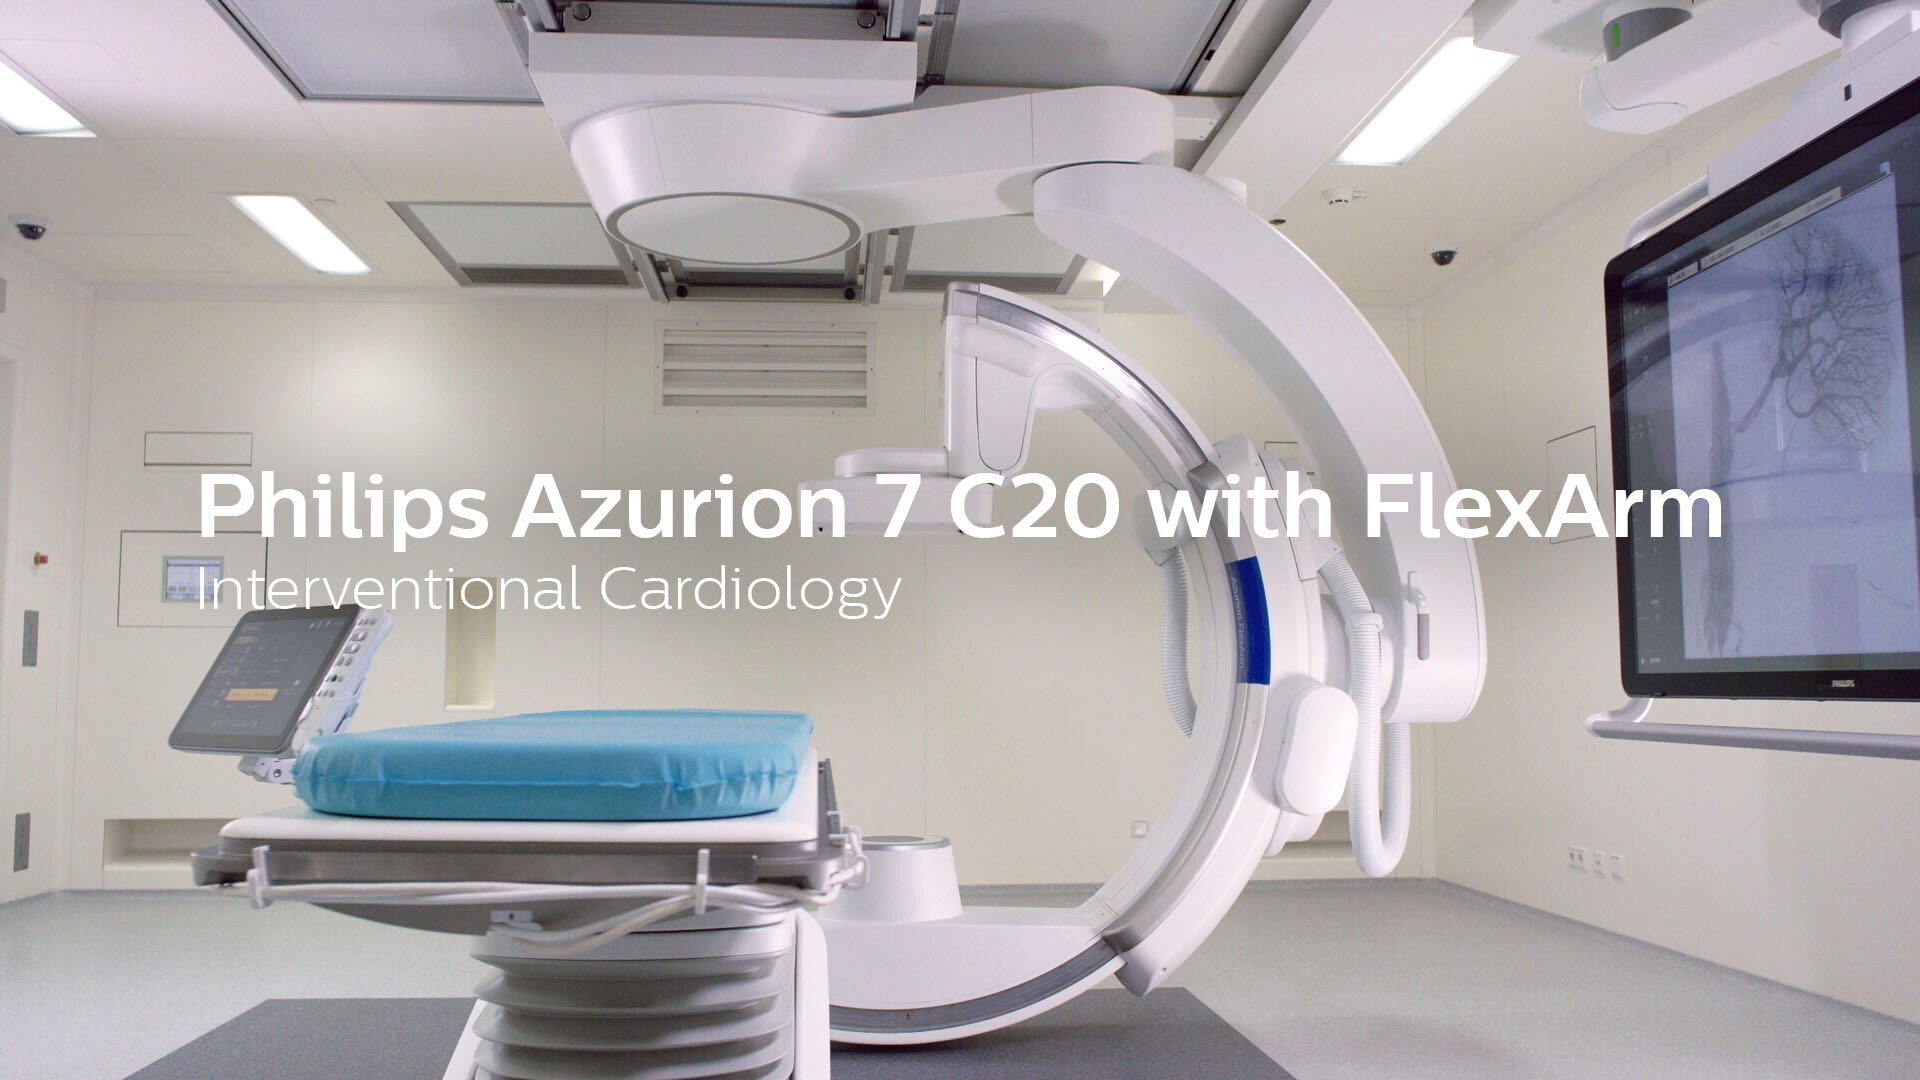 Philips Azurion 7 M20 with Flexarm interventional cardiology